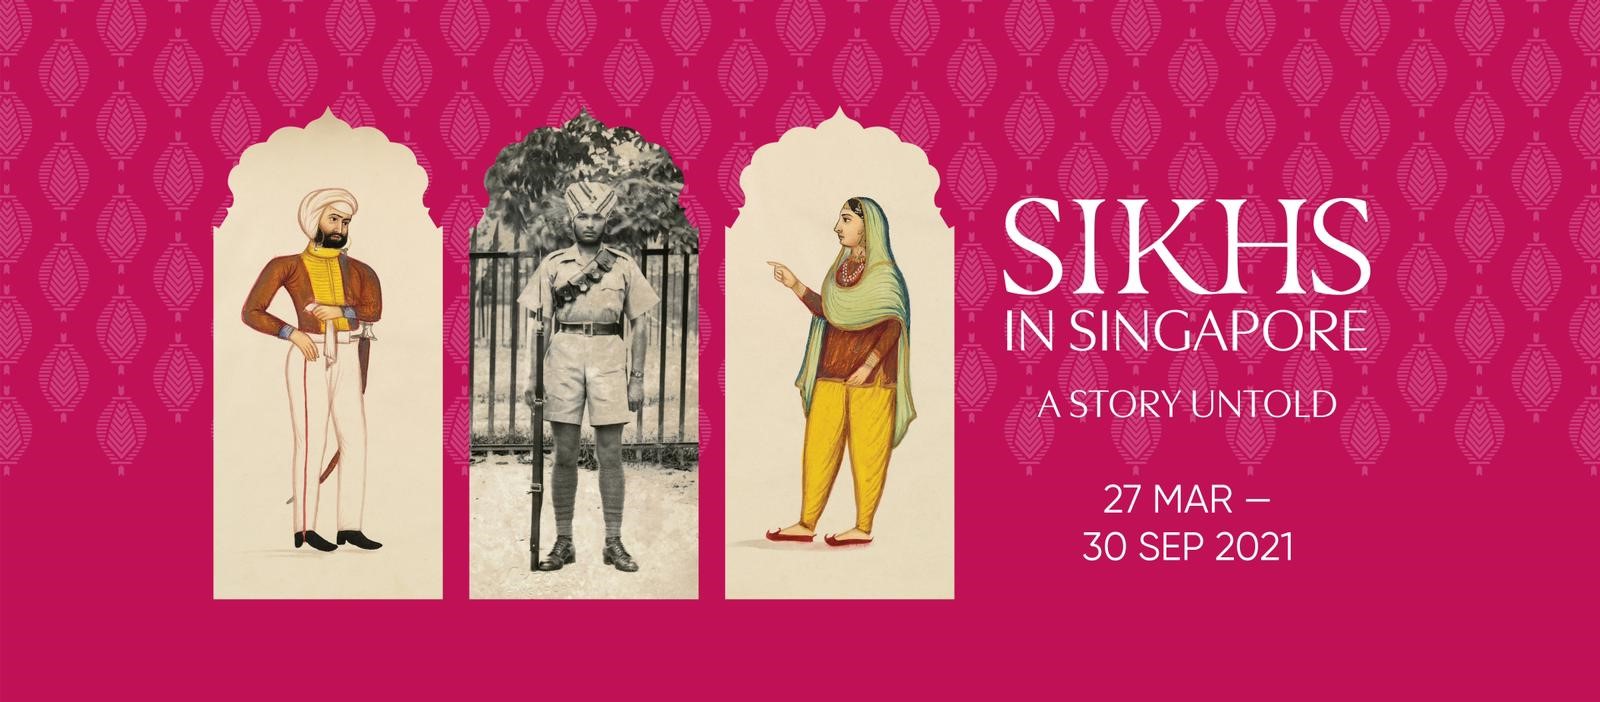 Sikh in Singapore